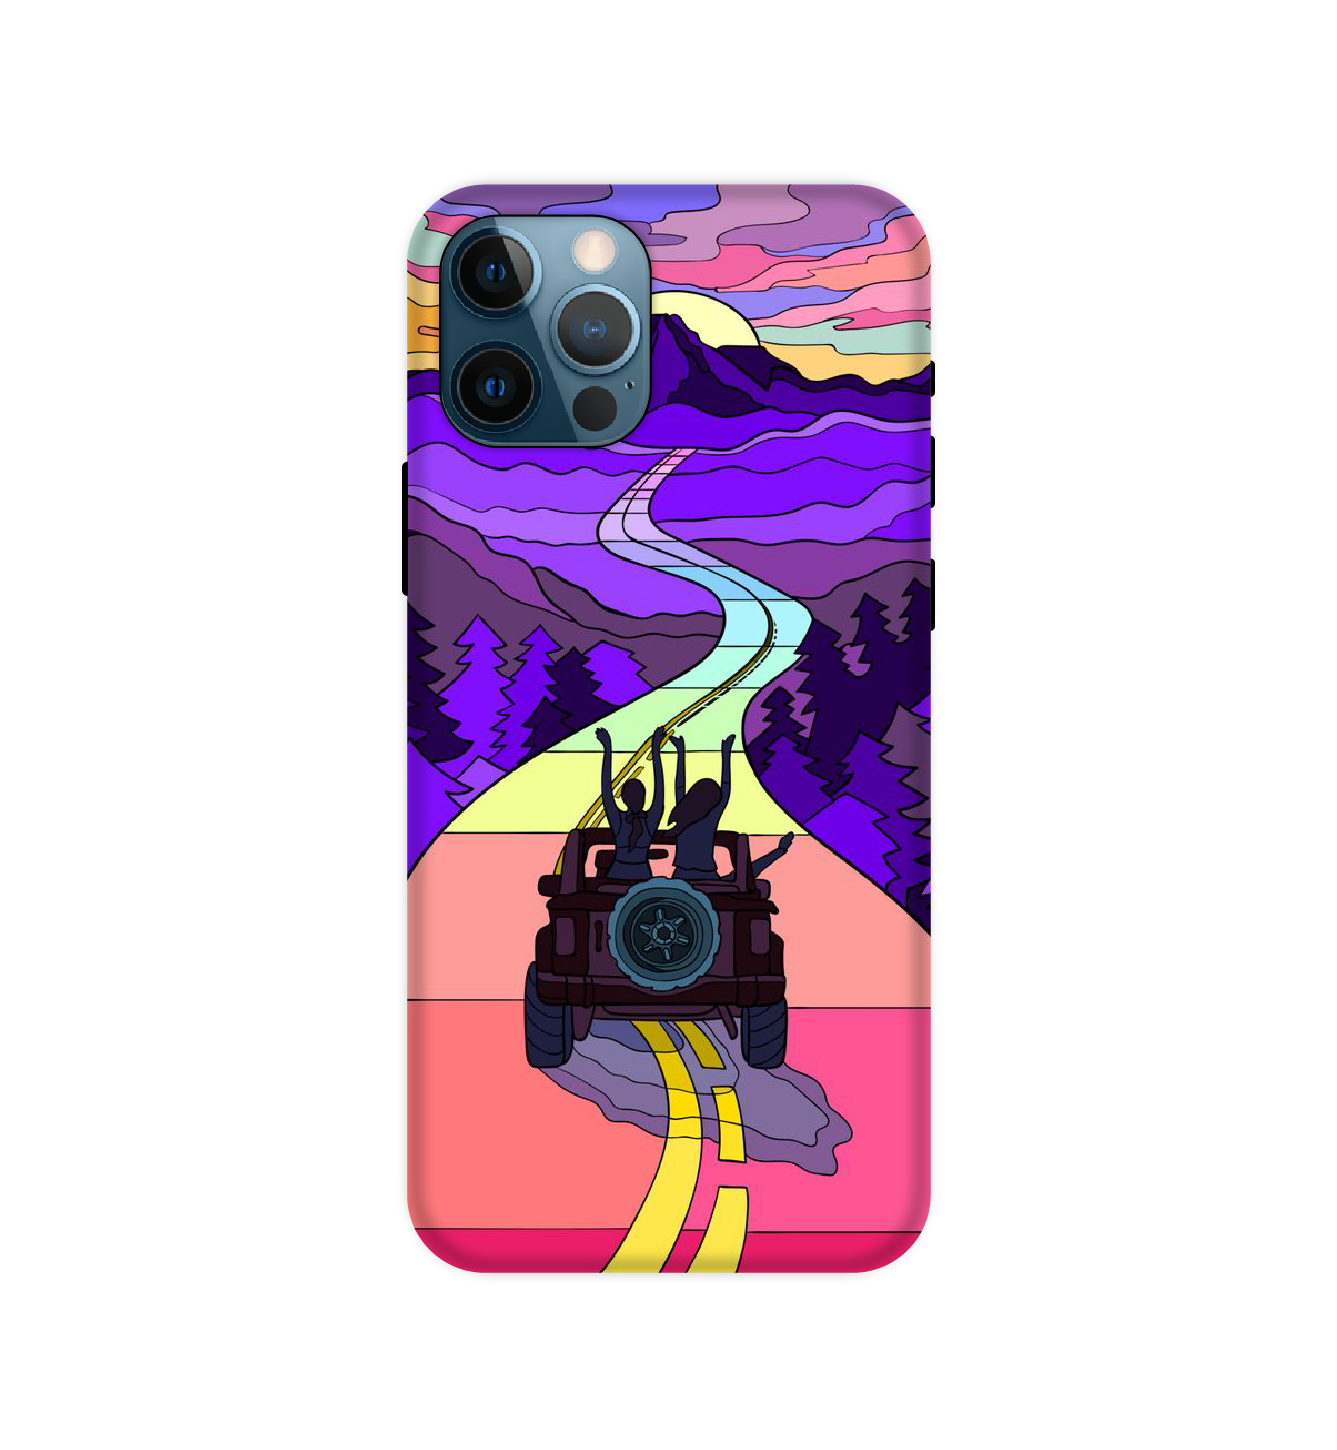 Road Trip- Hard Cases For Apple iPhone Models